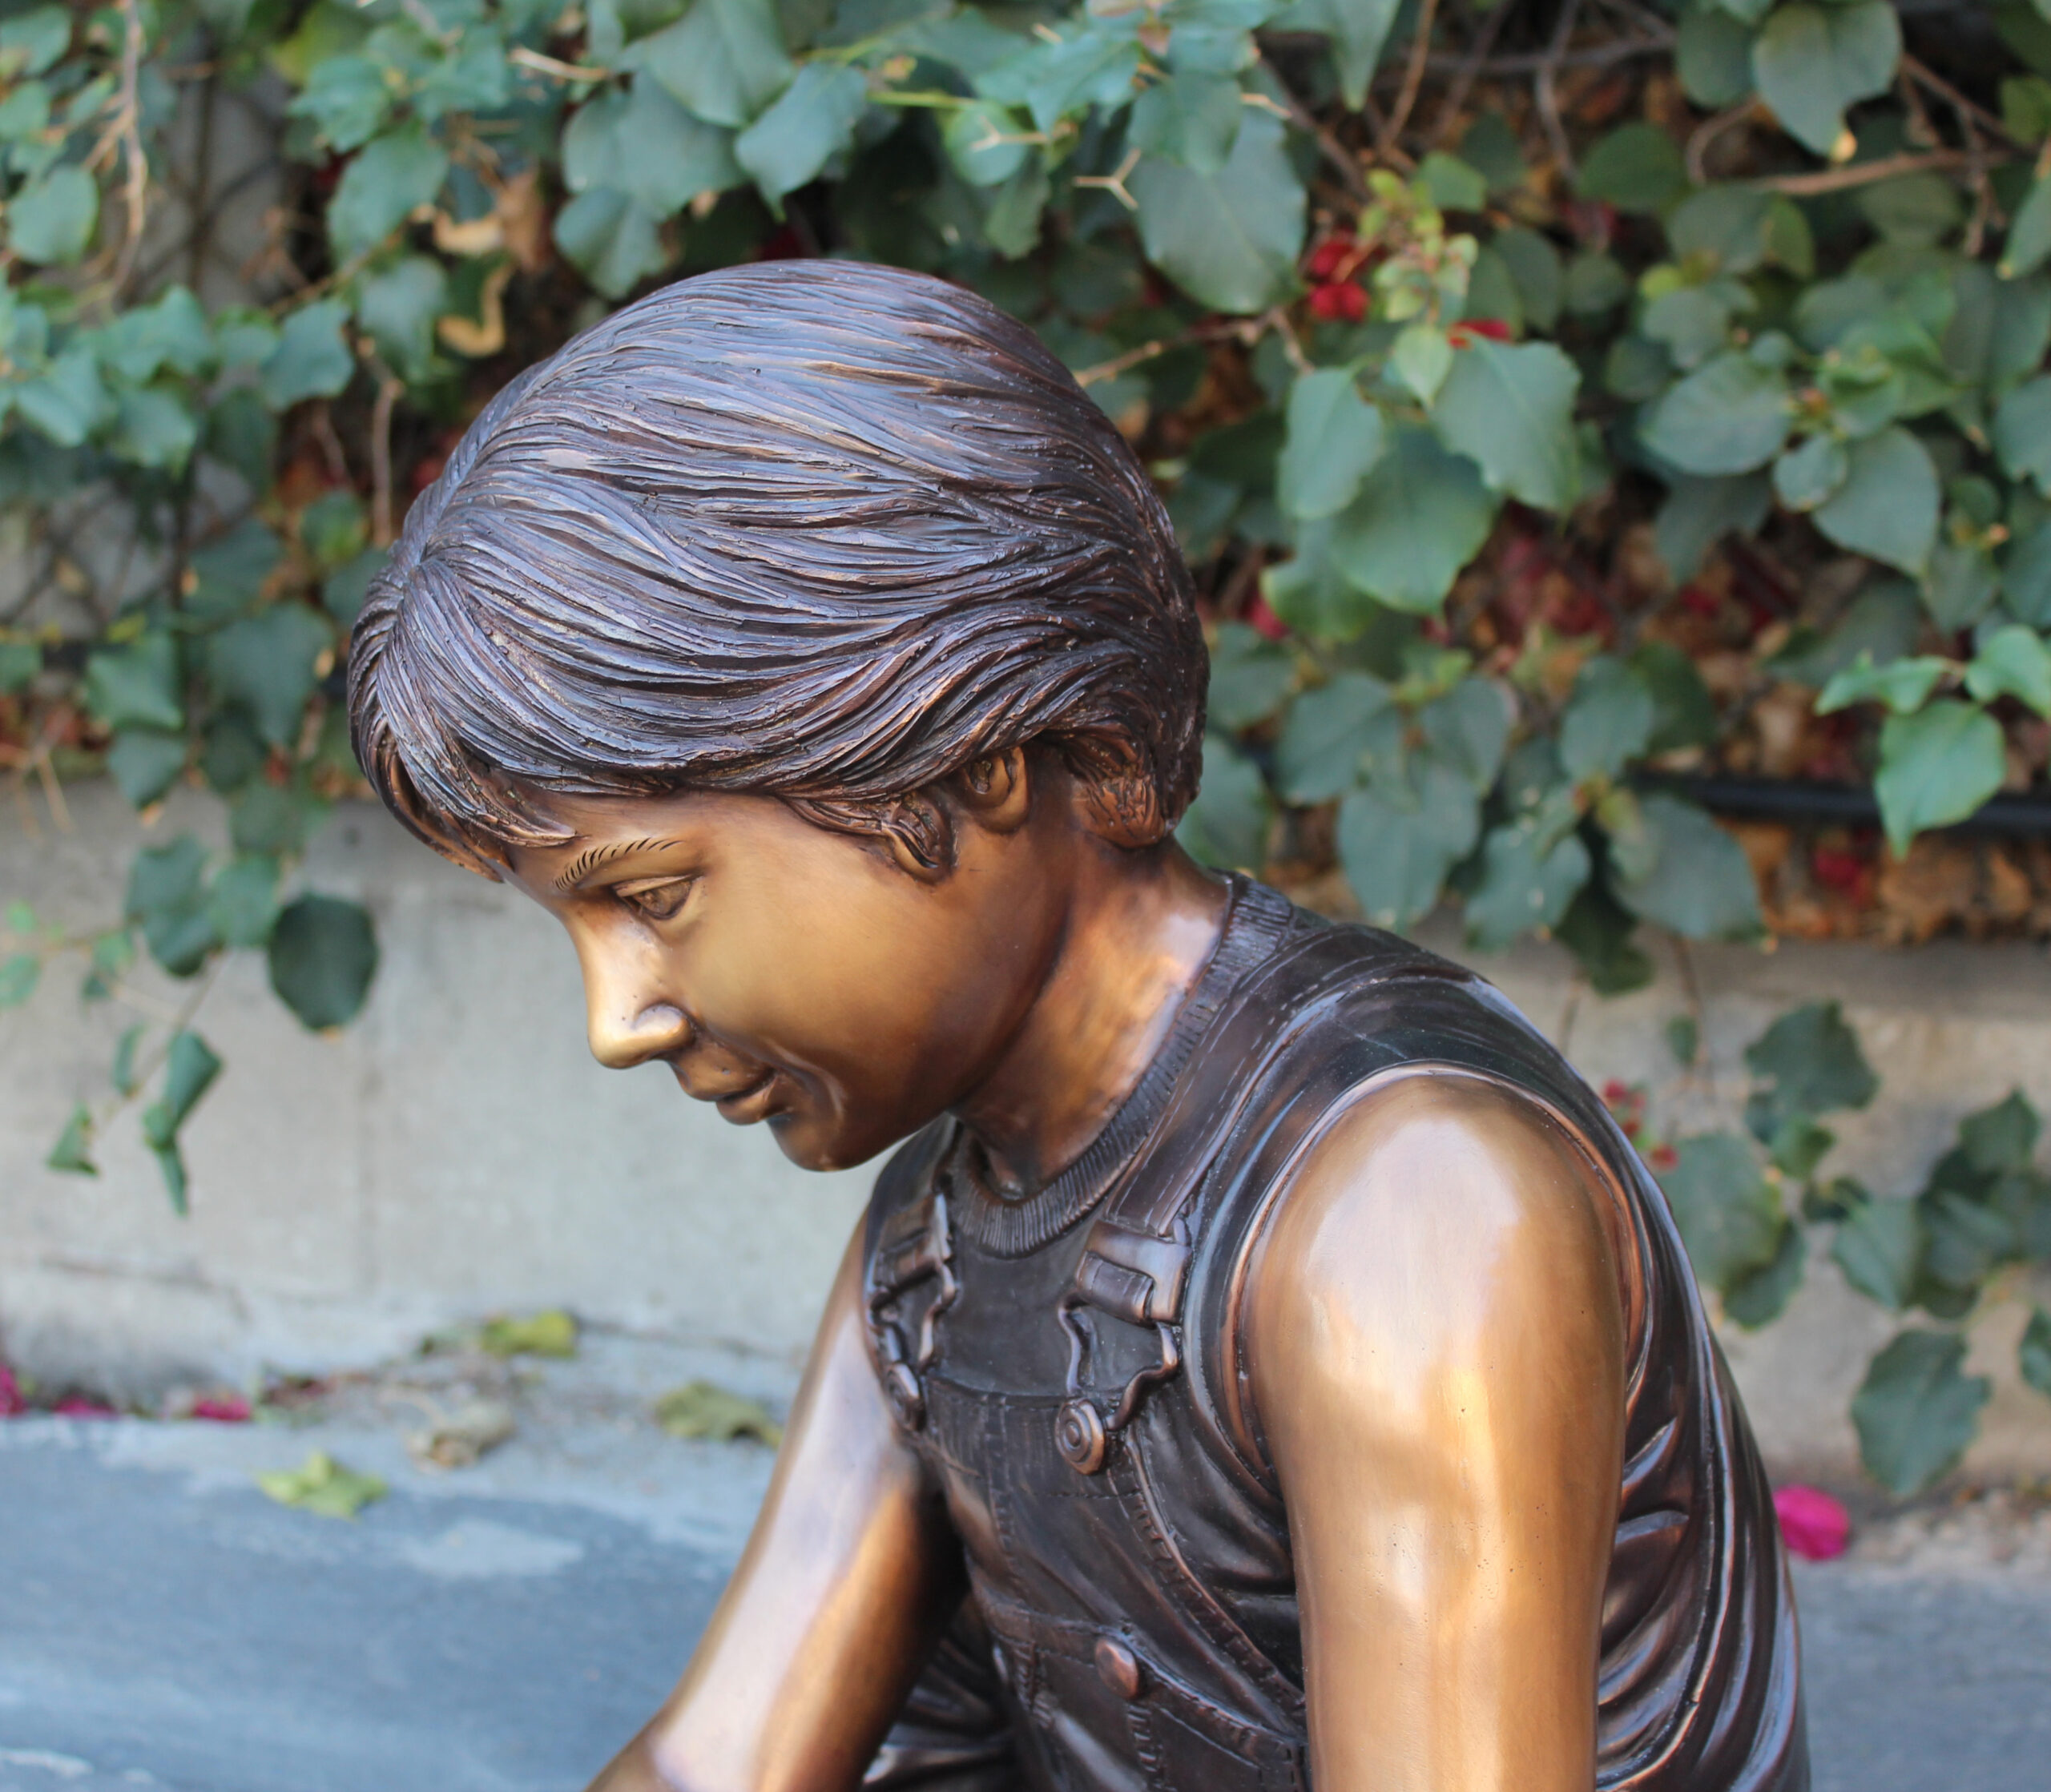 bronze statue of boy playing with turtle